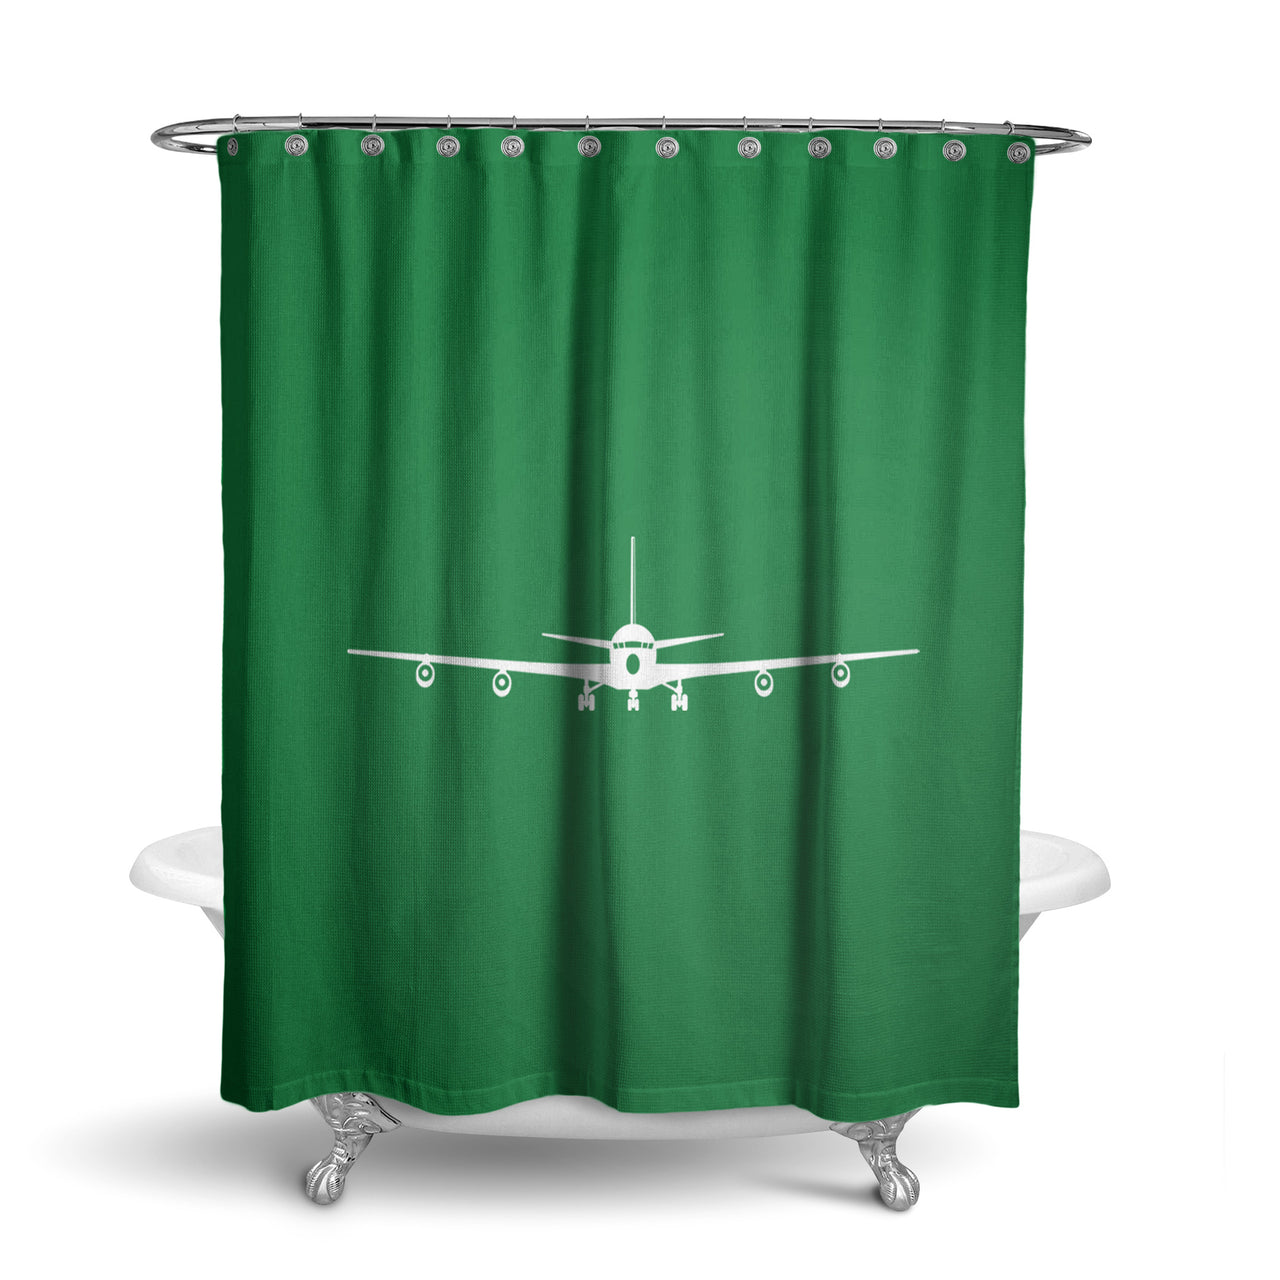 Boeing 707 Silhouette Designed Shower Curtains